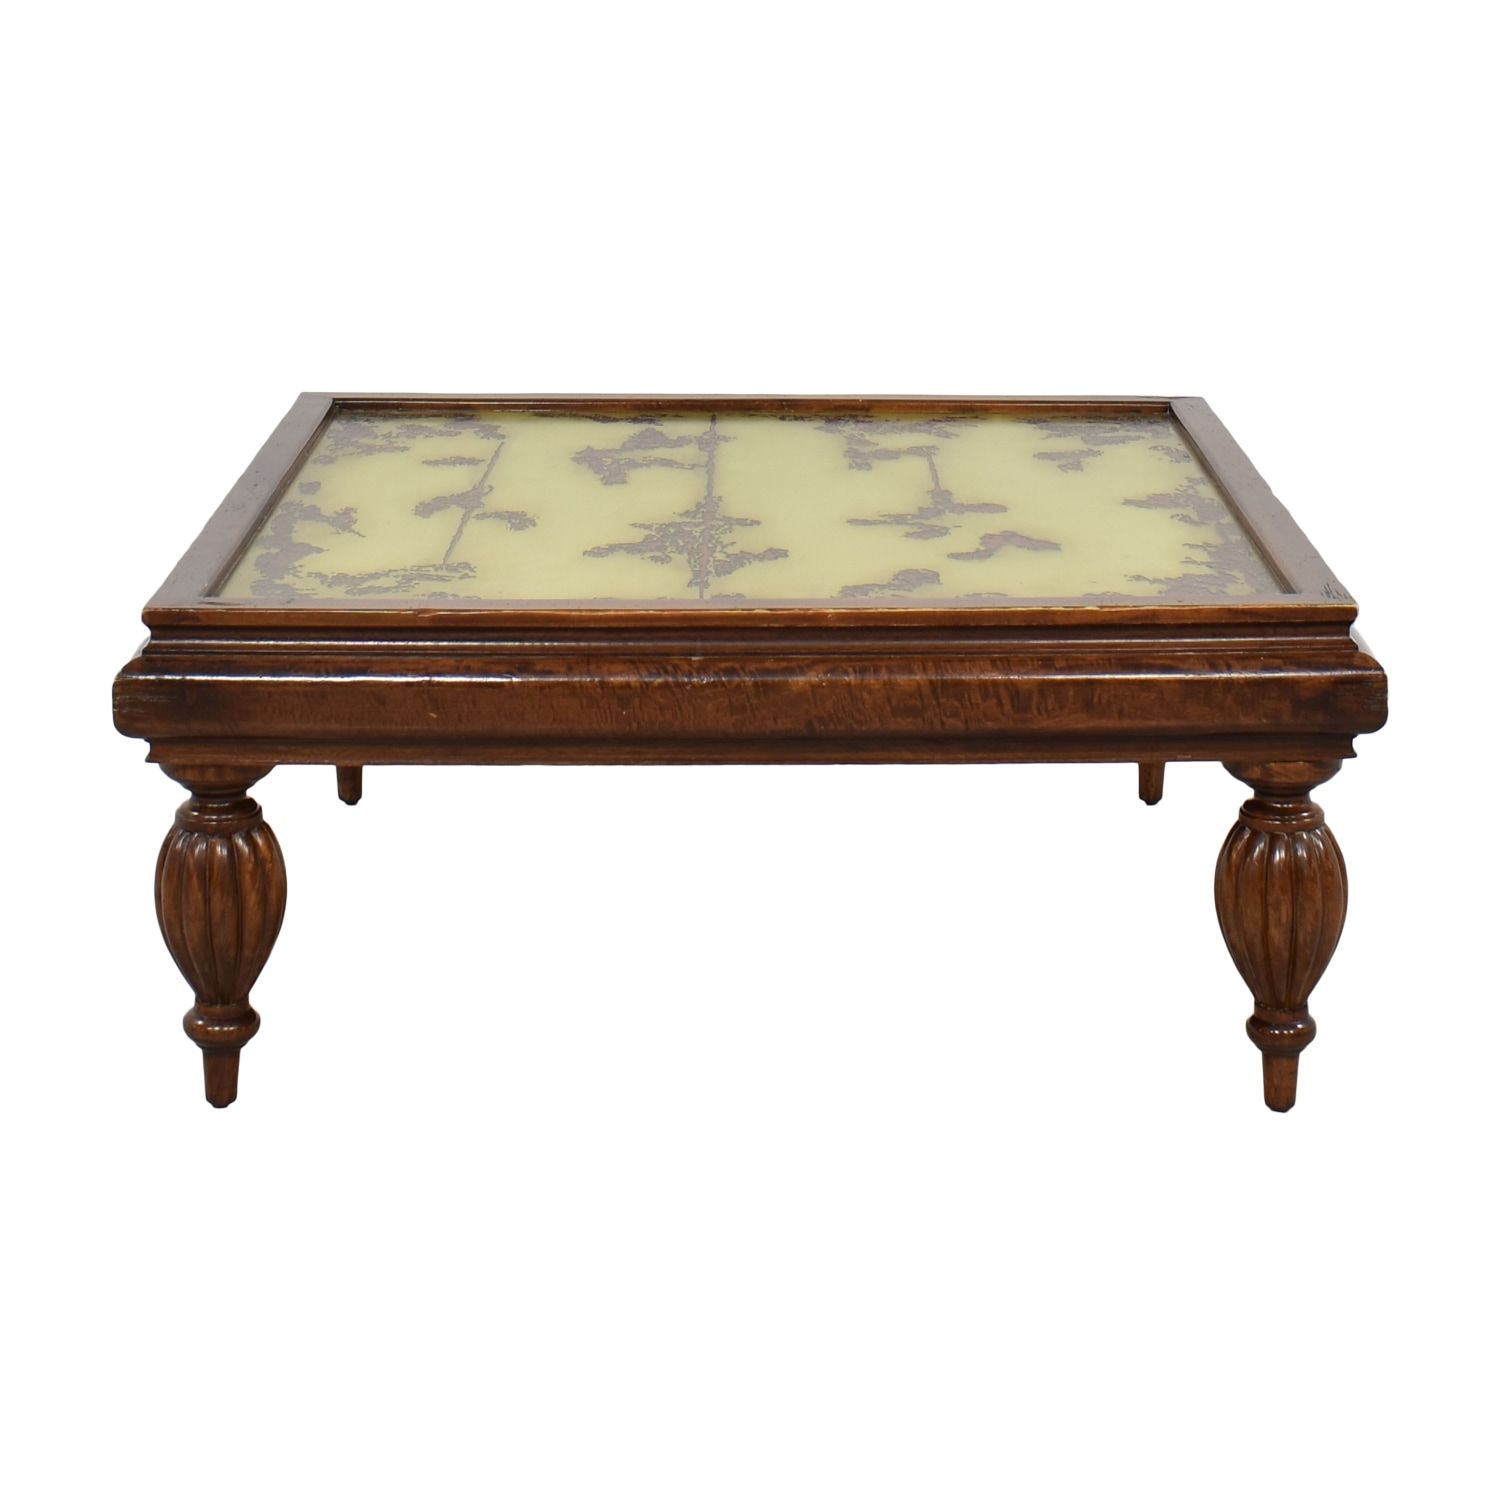 Uttermost Transitional Square Coffee Table | 88% Off | Kaiyo Intended For Transitional Square Coffee Tables (View 5 of 15)